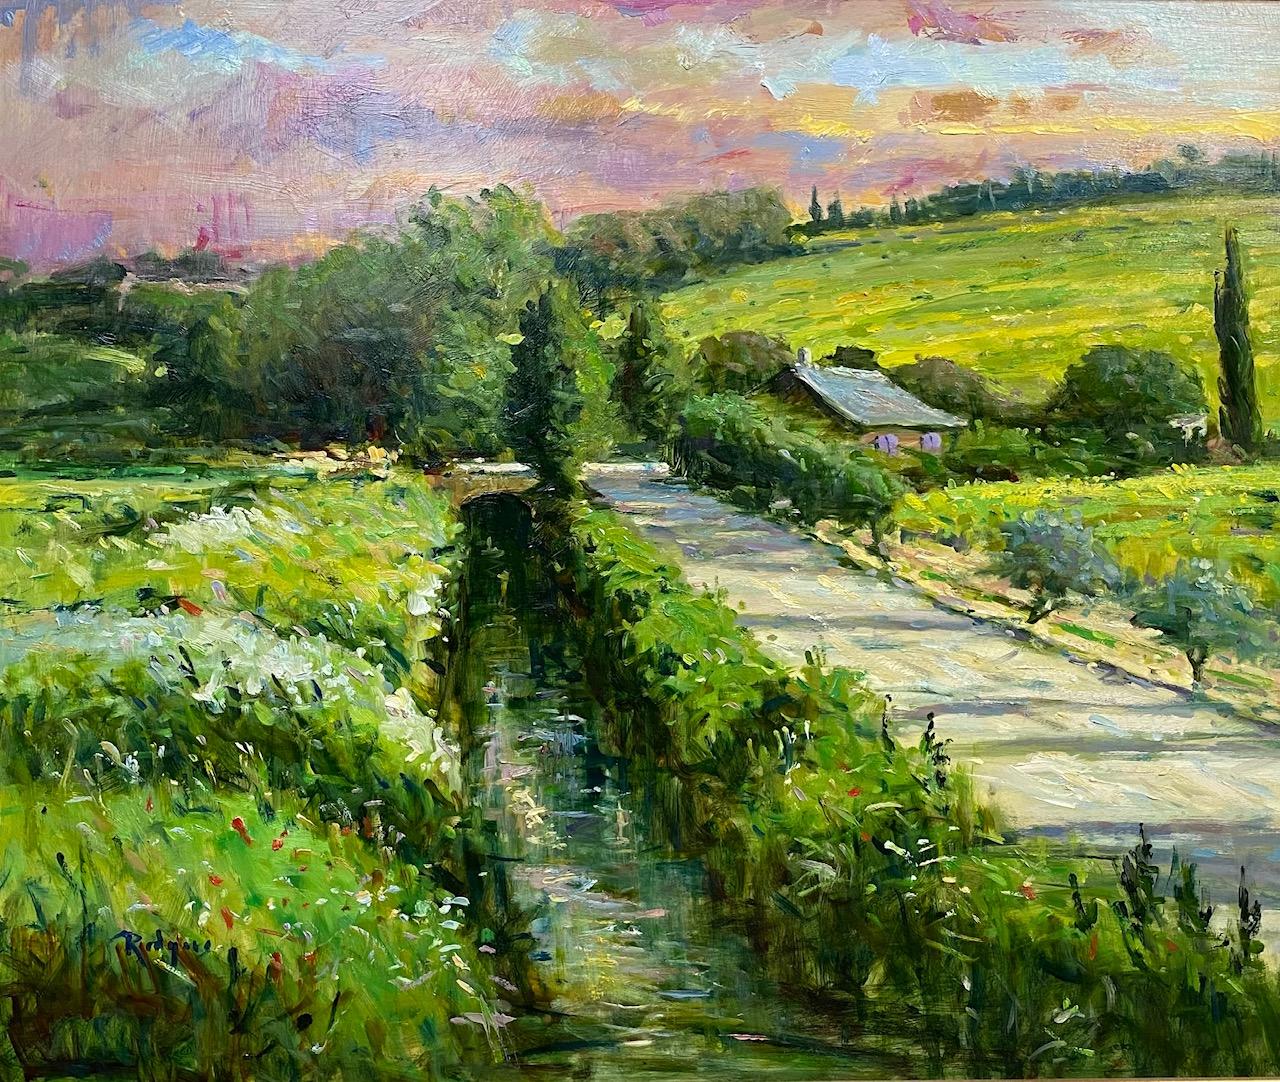 Morning Light in Chateauneuf du Pape, original French impressionist landscape - Painting by Jim Rodgers